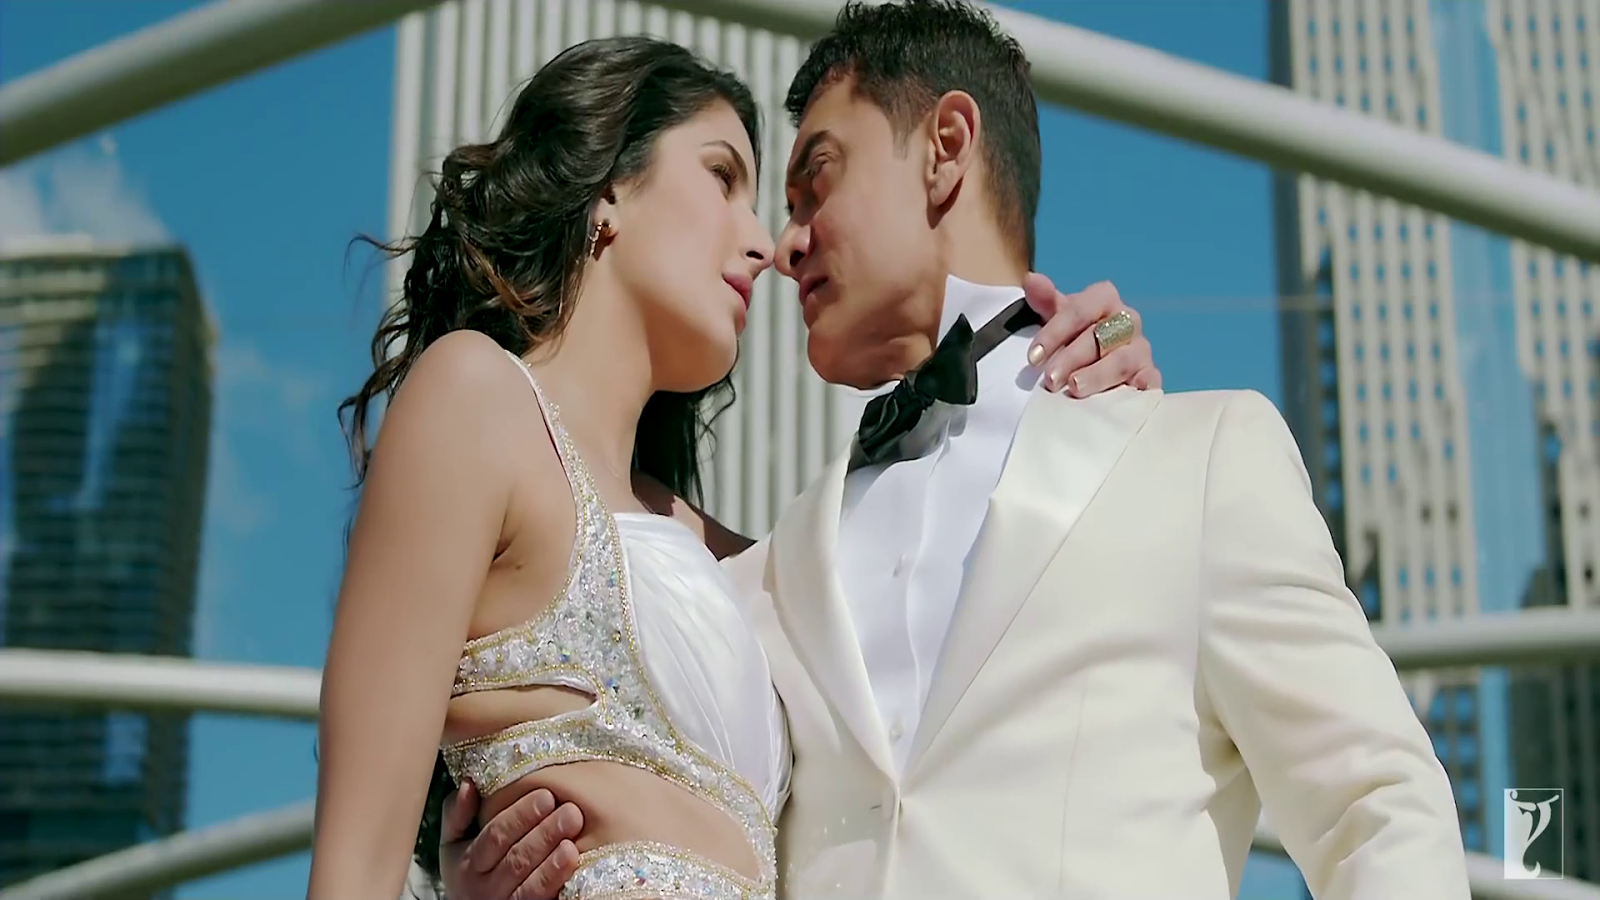 Kamali song from dhoom 3 1080p torrent album or cover nelly sweatsuit torrent